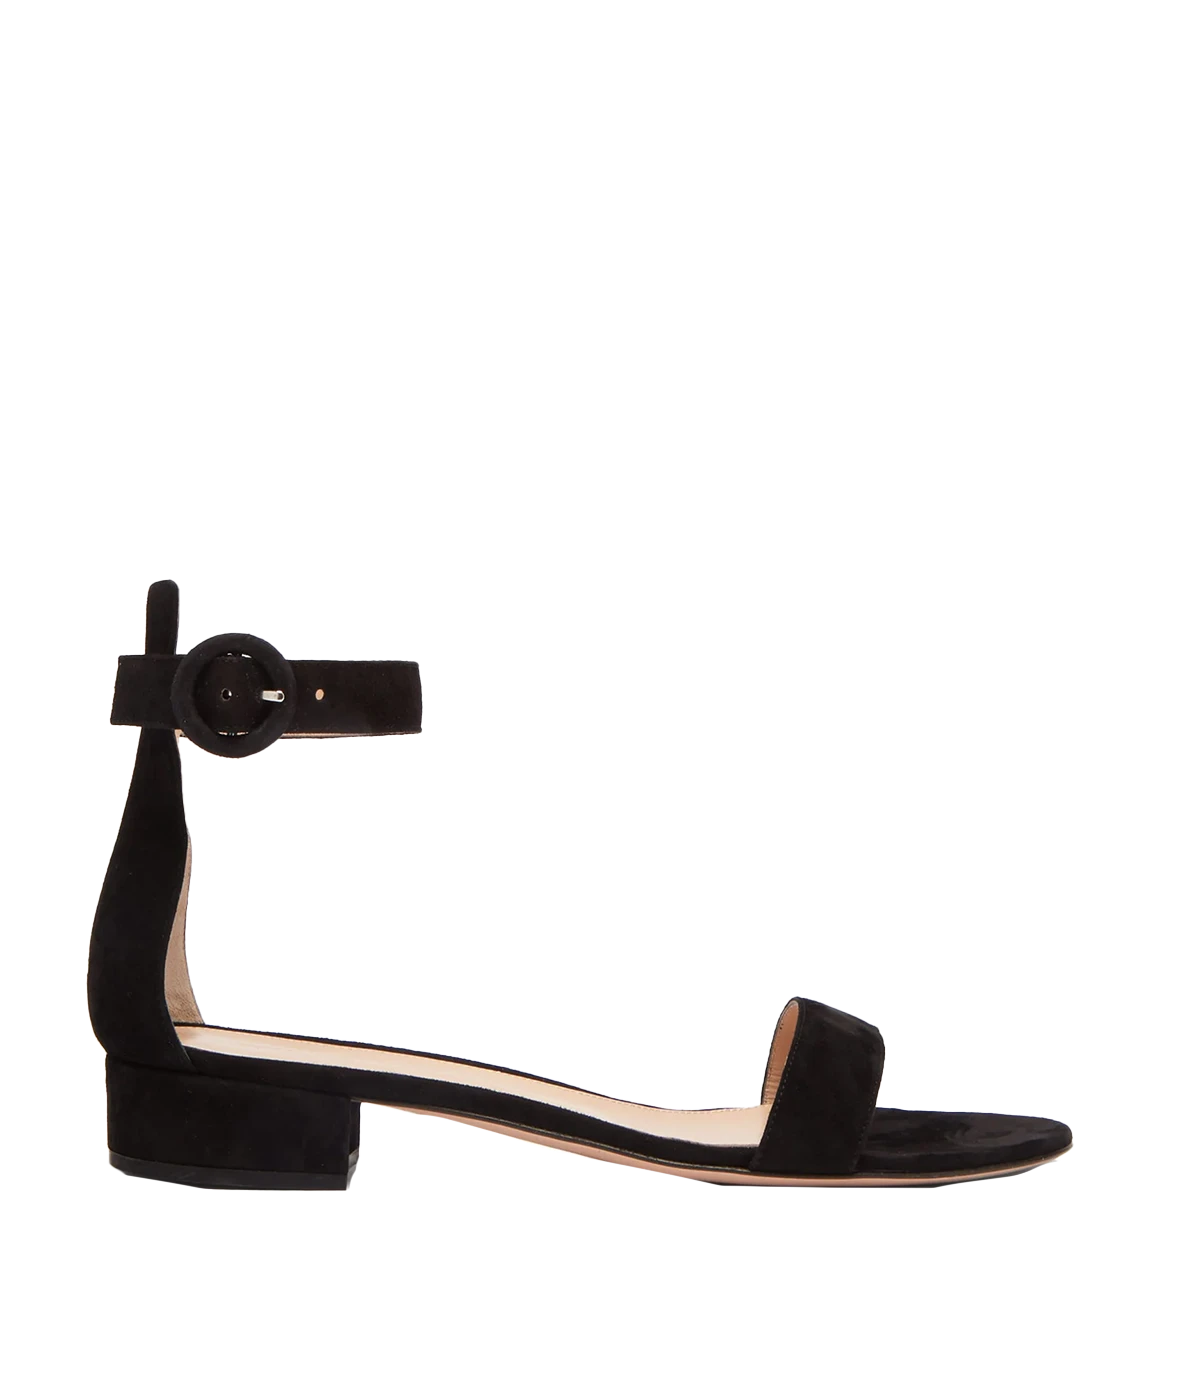 Image of a black leather 20mm flat sandal, with an ankle and toe strap. 